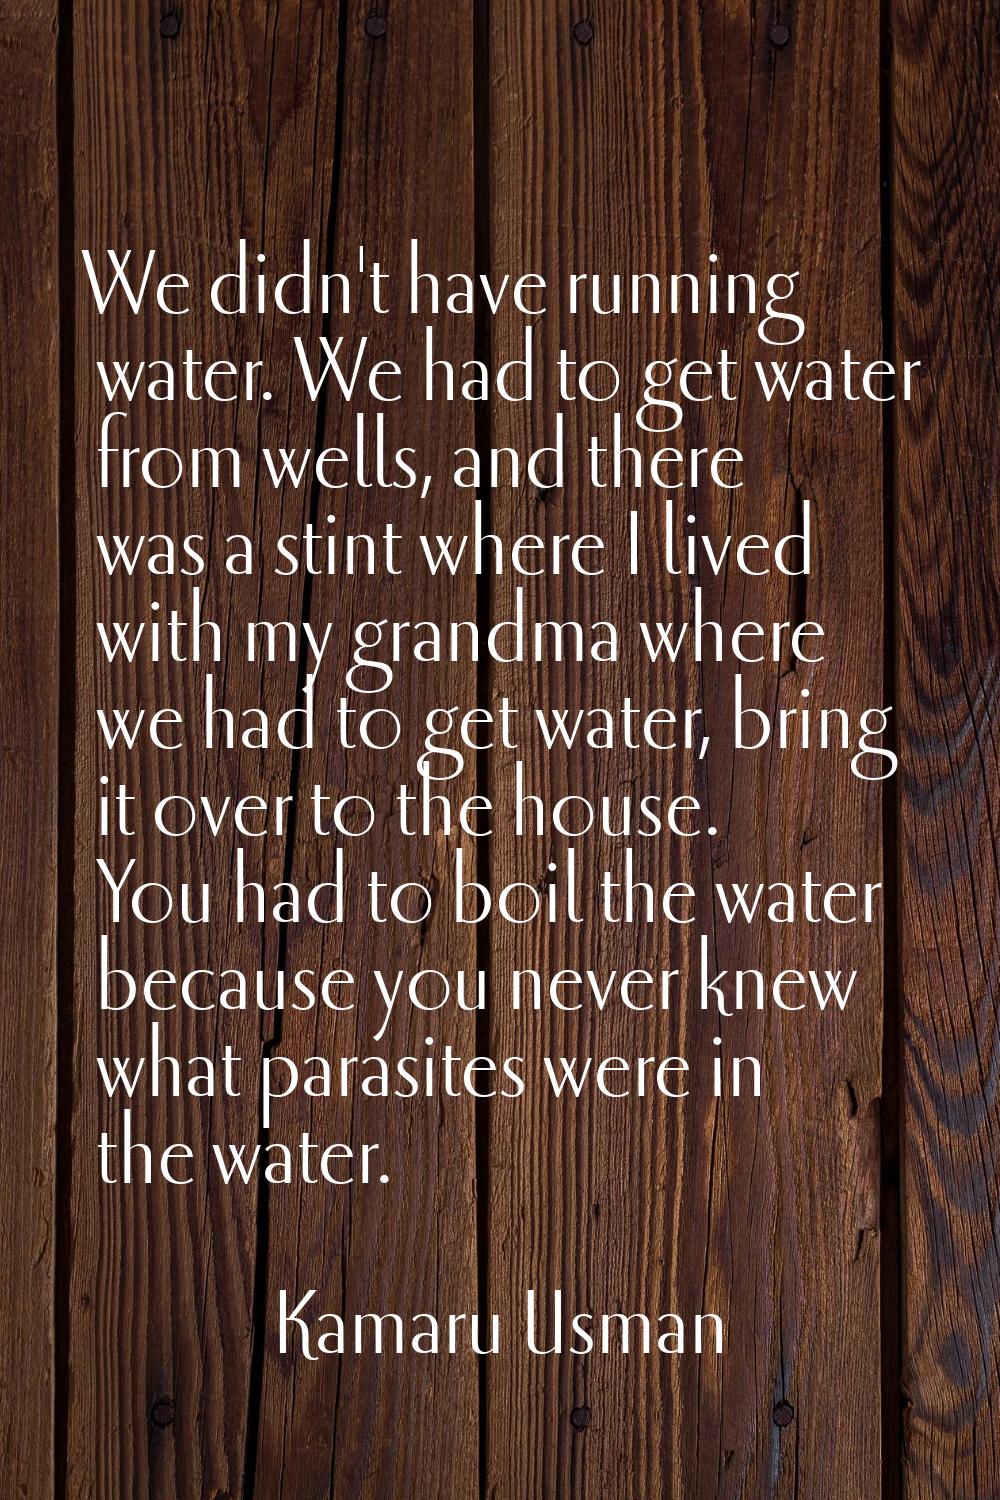 We didn't have running water. We had to get water from wells, and there was a stint where I lived w